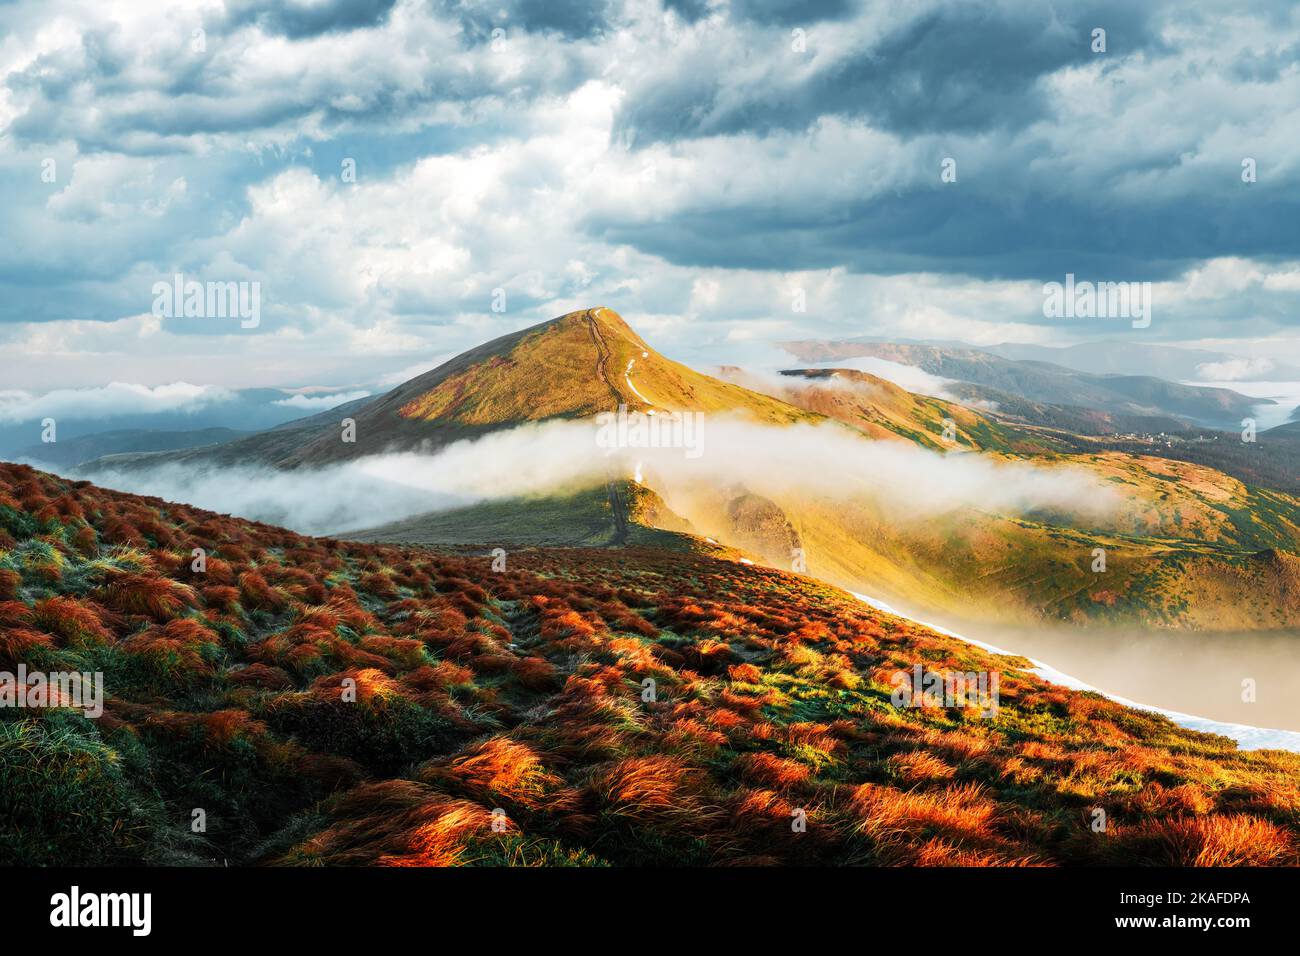 Orange grass trembling in the wind in autumn mountains at sunrise. A soft mist flows through the mountain peaks. Carpathian mountains, Ukraine. Landscape photography Stock Photo